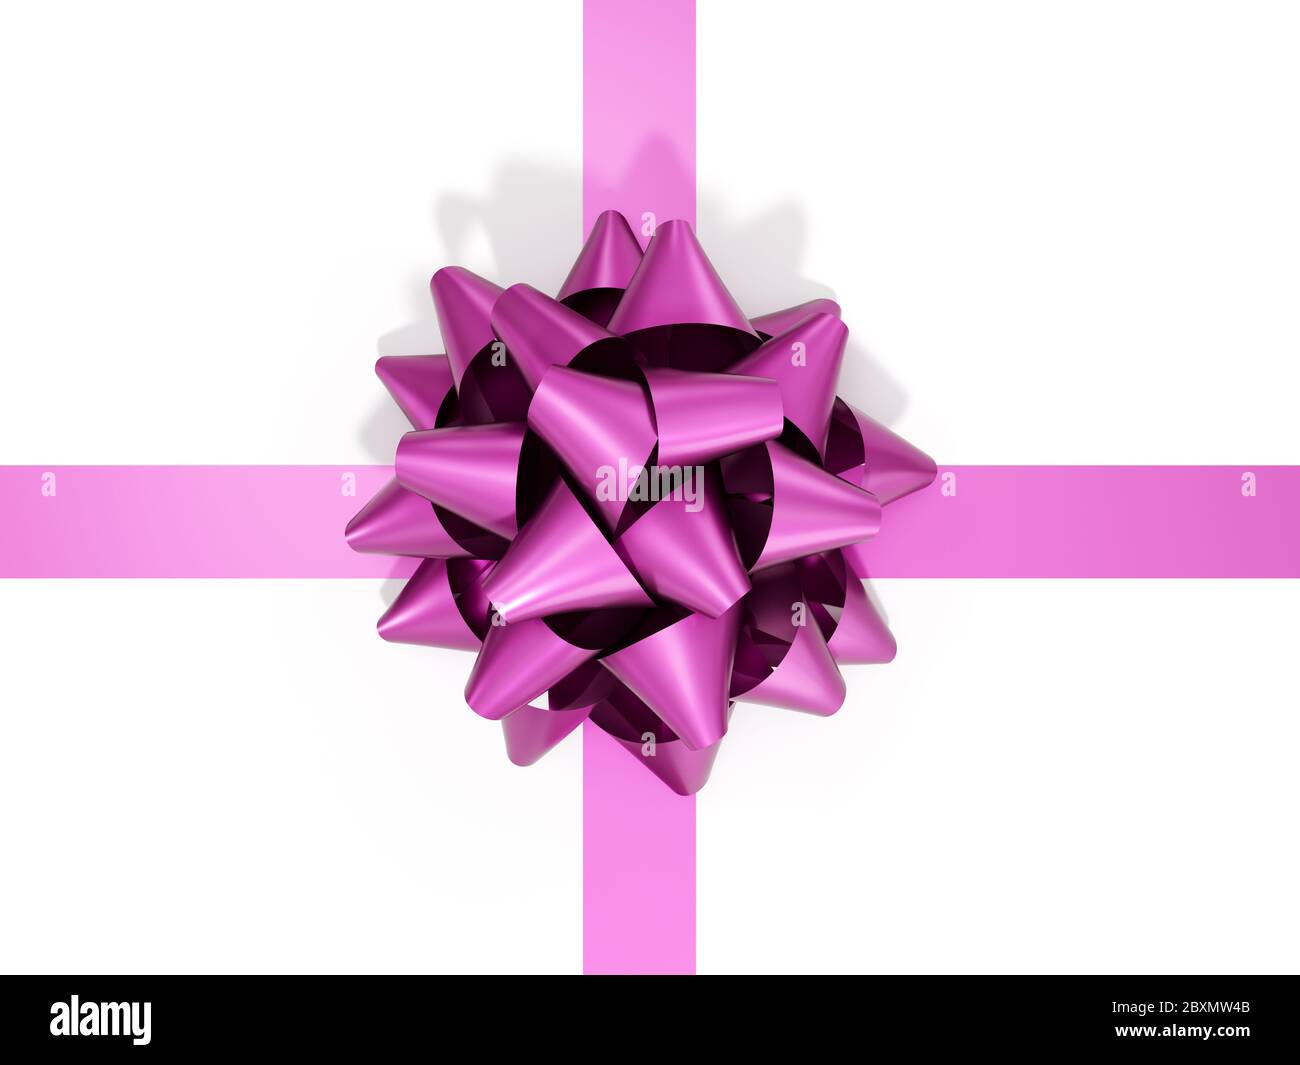 Purple bow gift. 3d rendering illustration isolated on white background Stock Photo